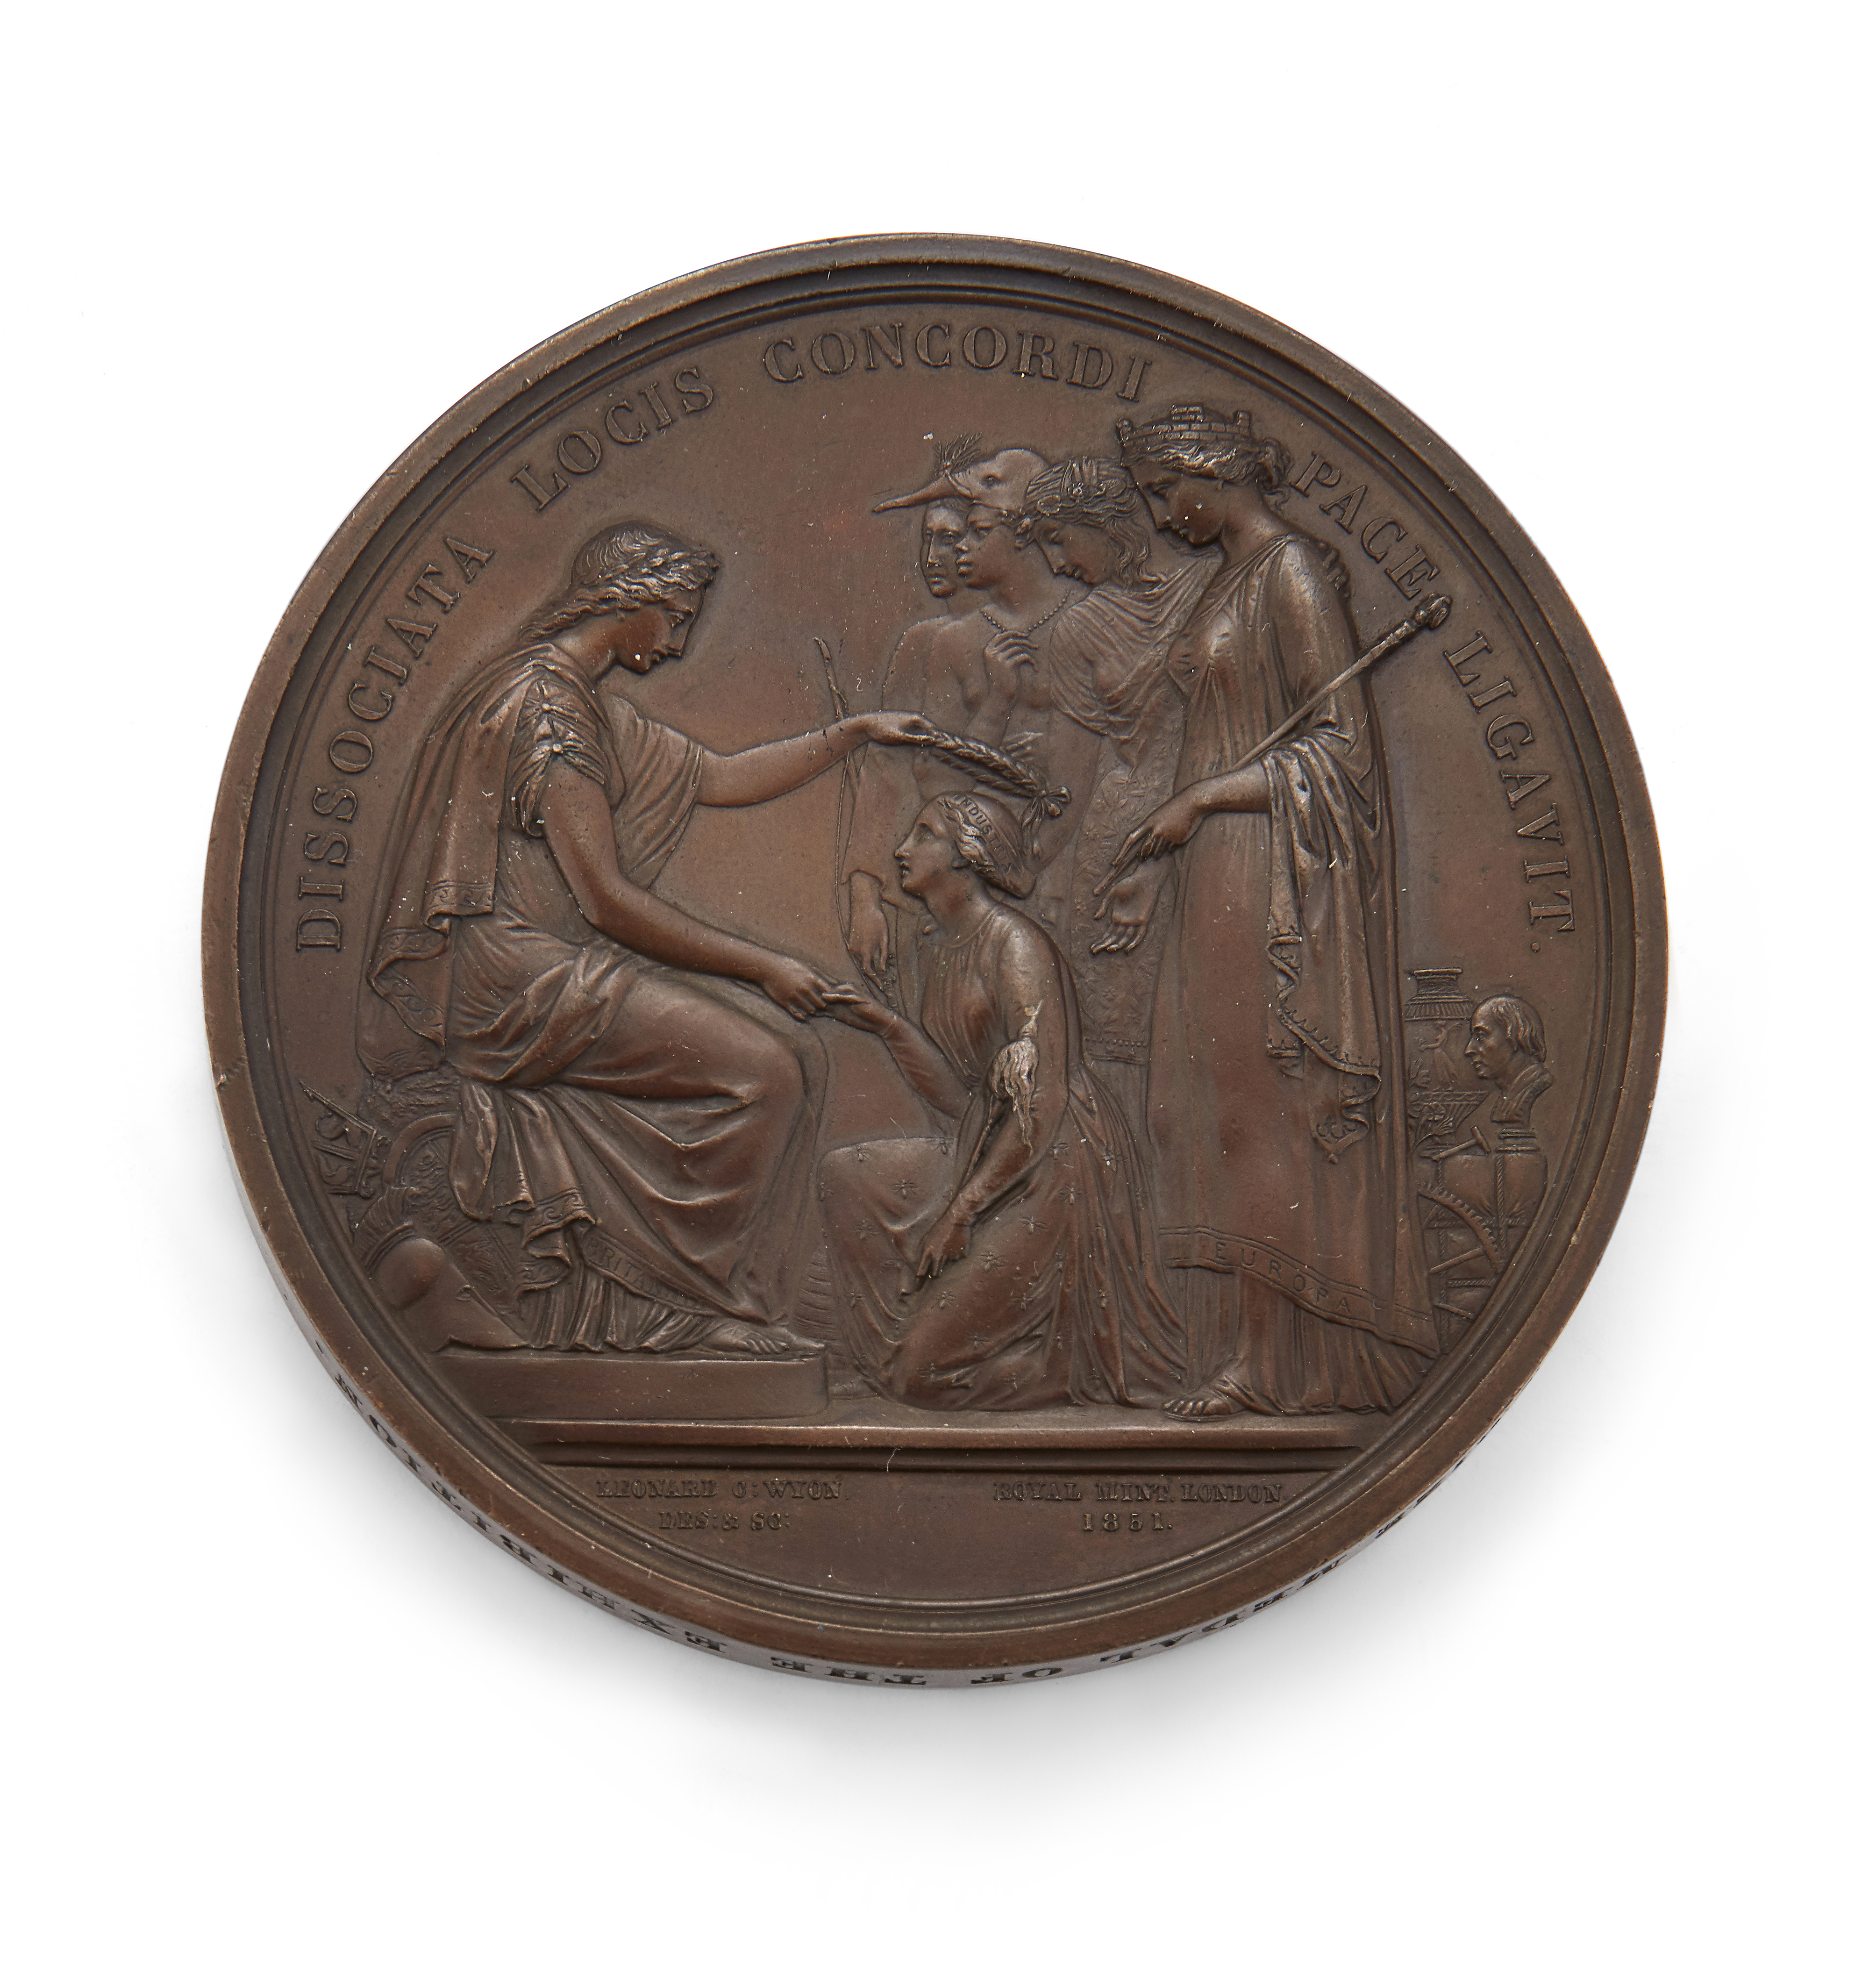 A Great Exhibition of 1851 bronze prize medal, by W. and L. C. Wyon, obverse with conjoined heads... - Image 2 of 2